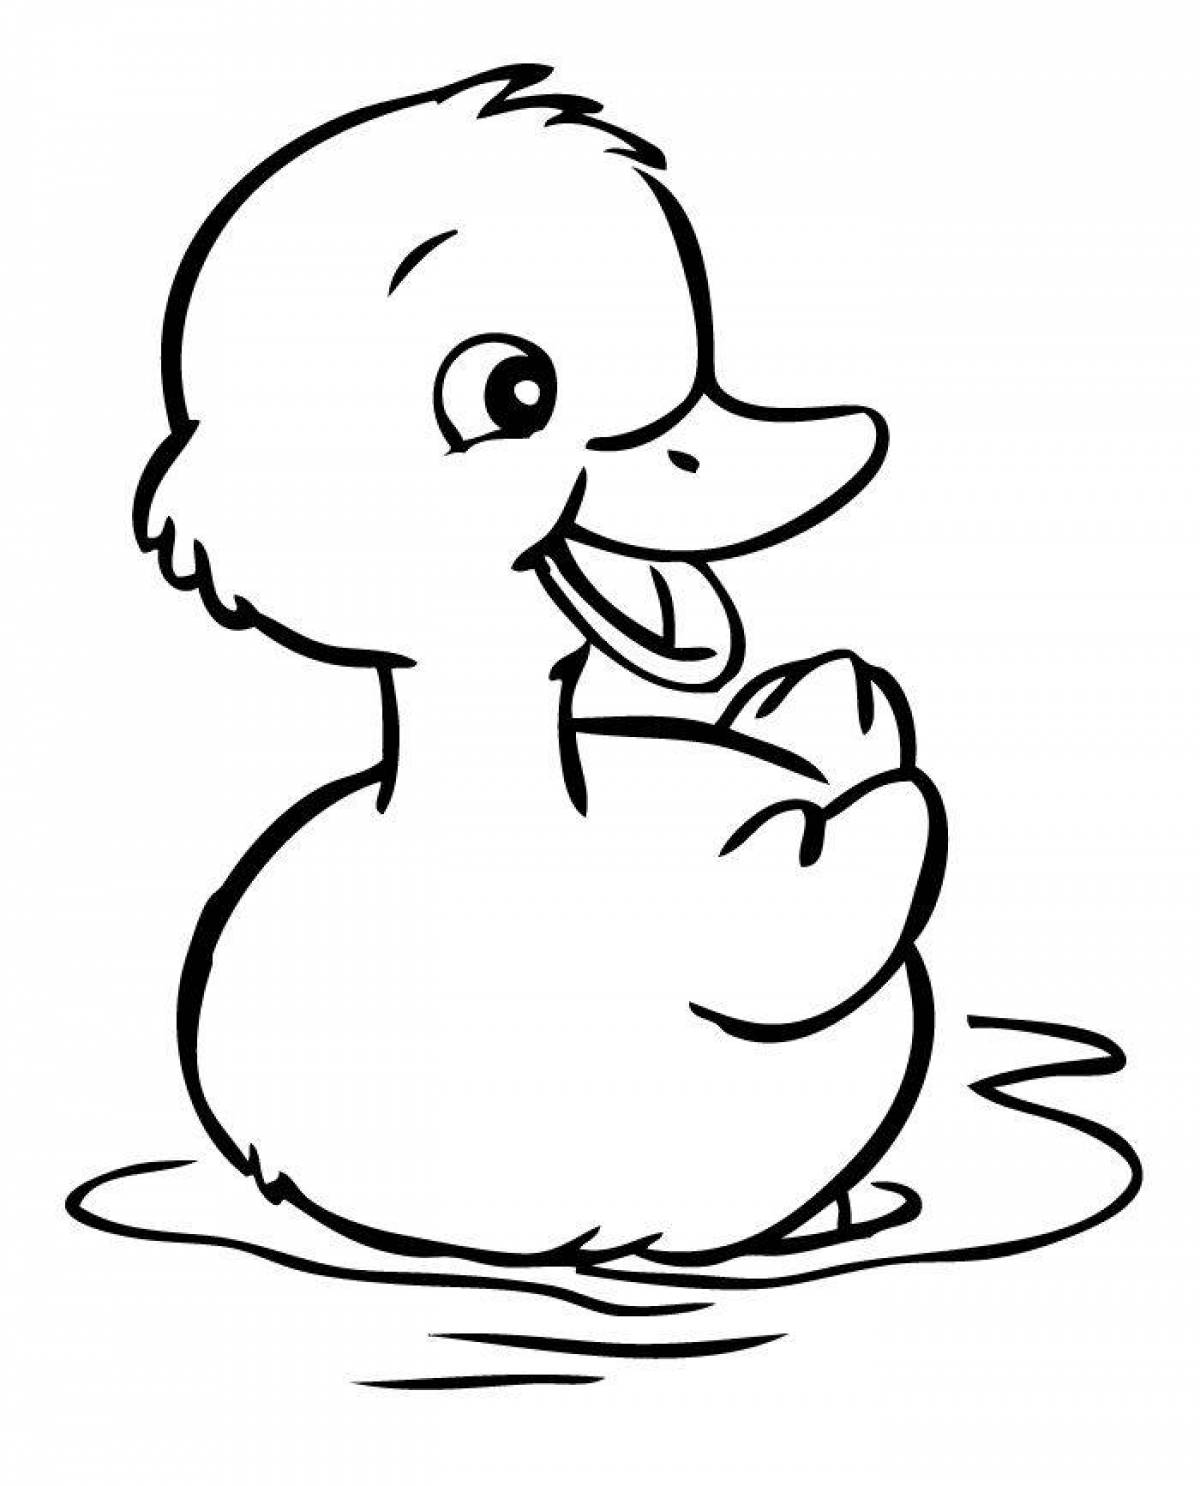 Duckling for kids #1